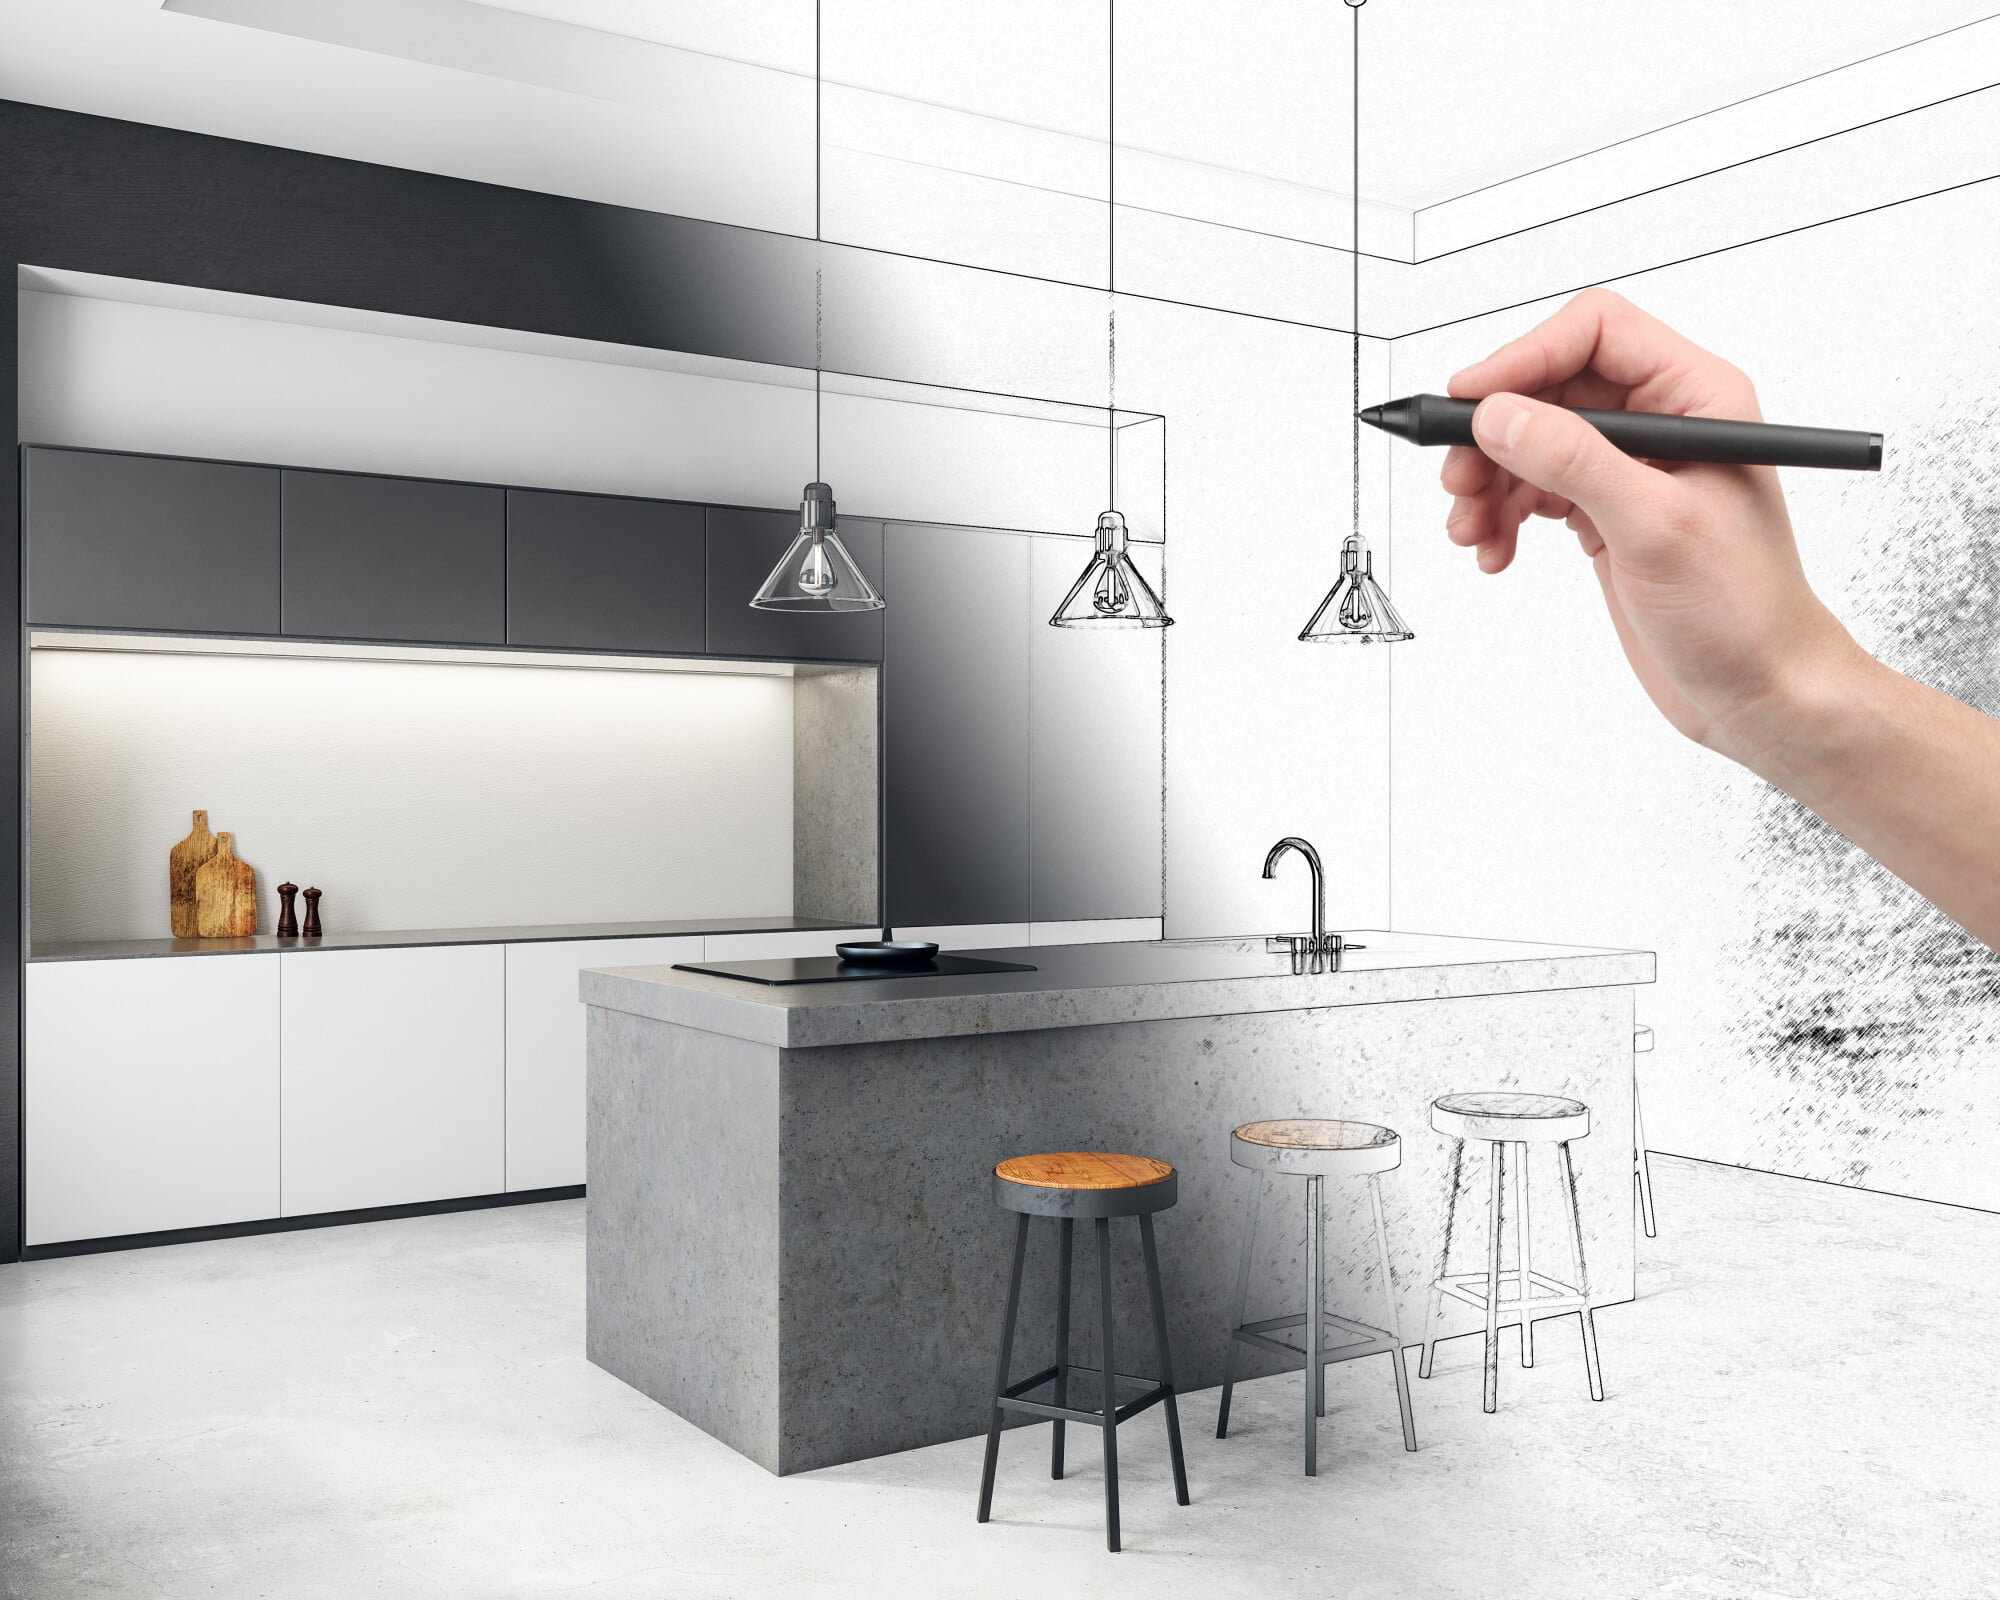 Renovating a kitchen may seem stressful, but it doesn't have to be. This guide has four tips that will help get you started.